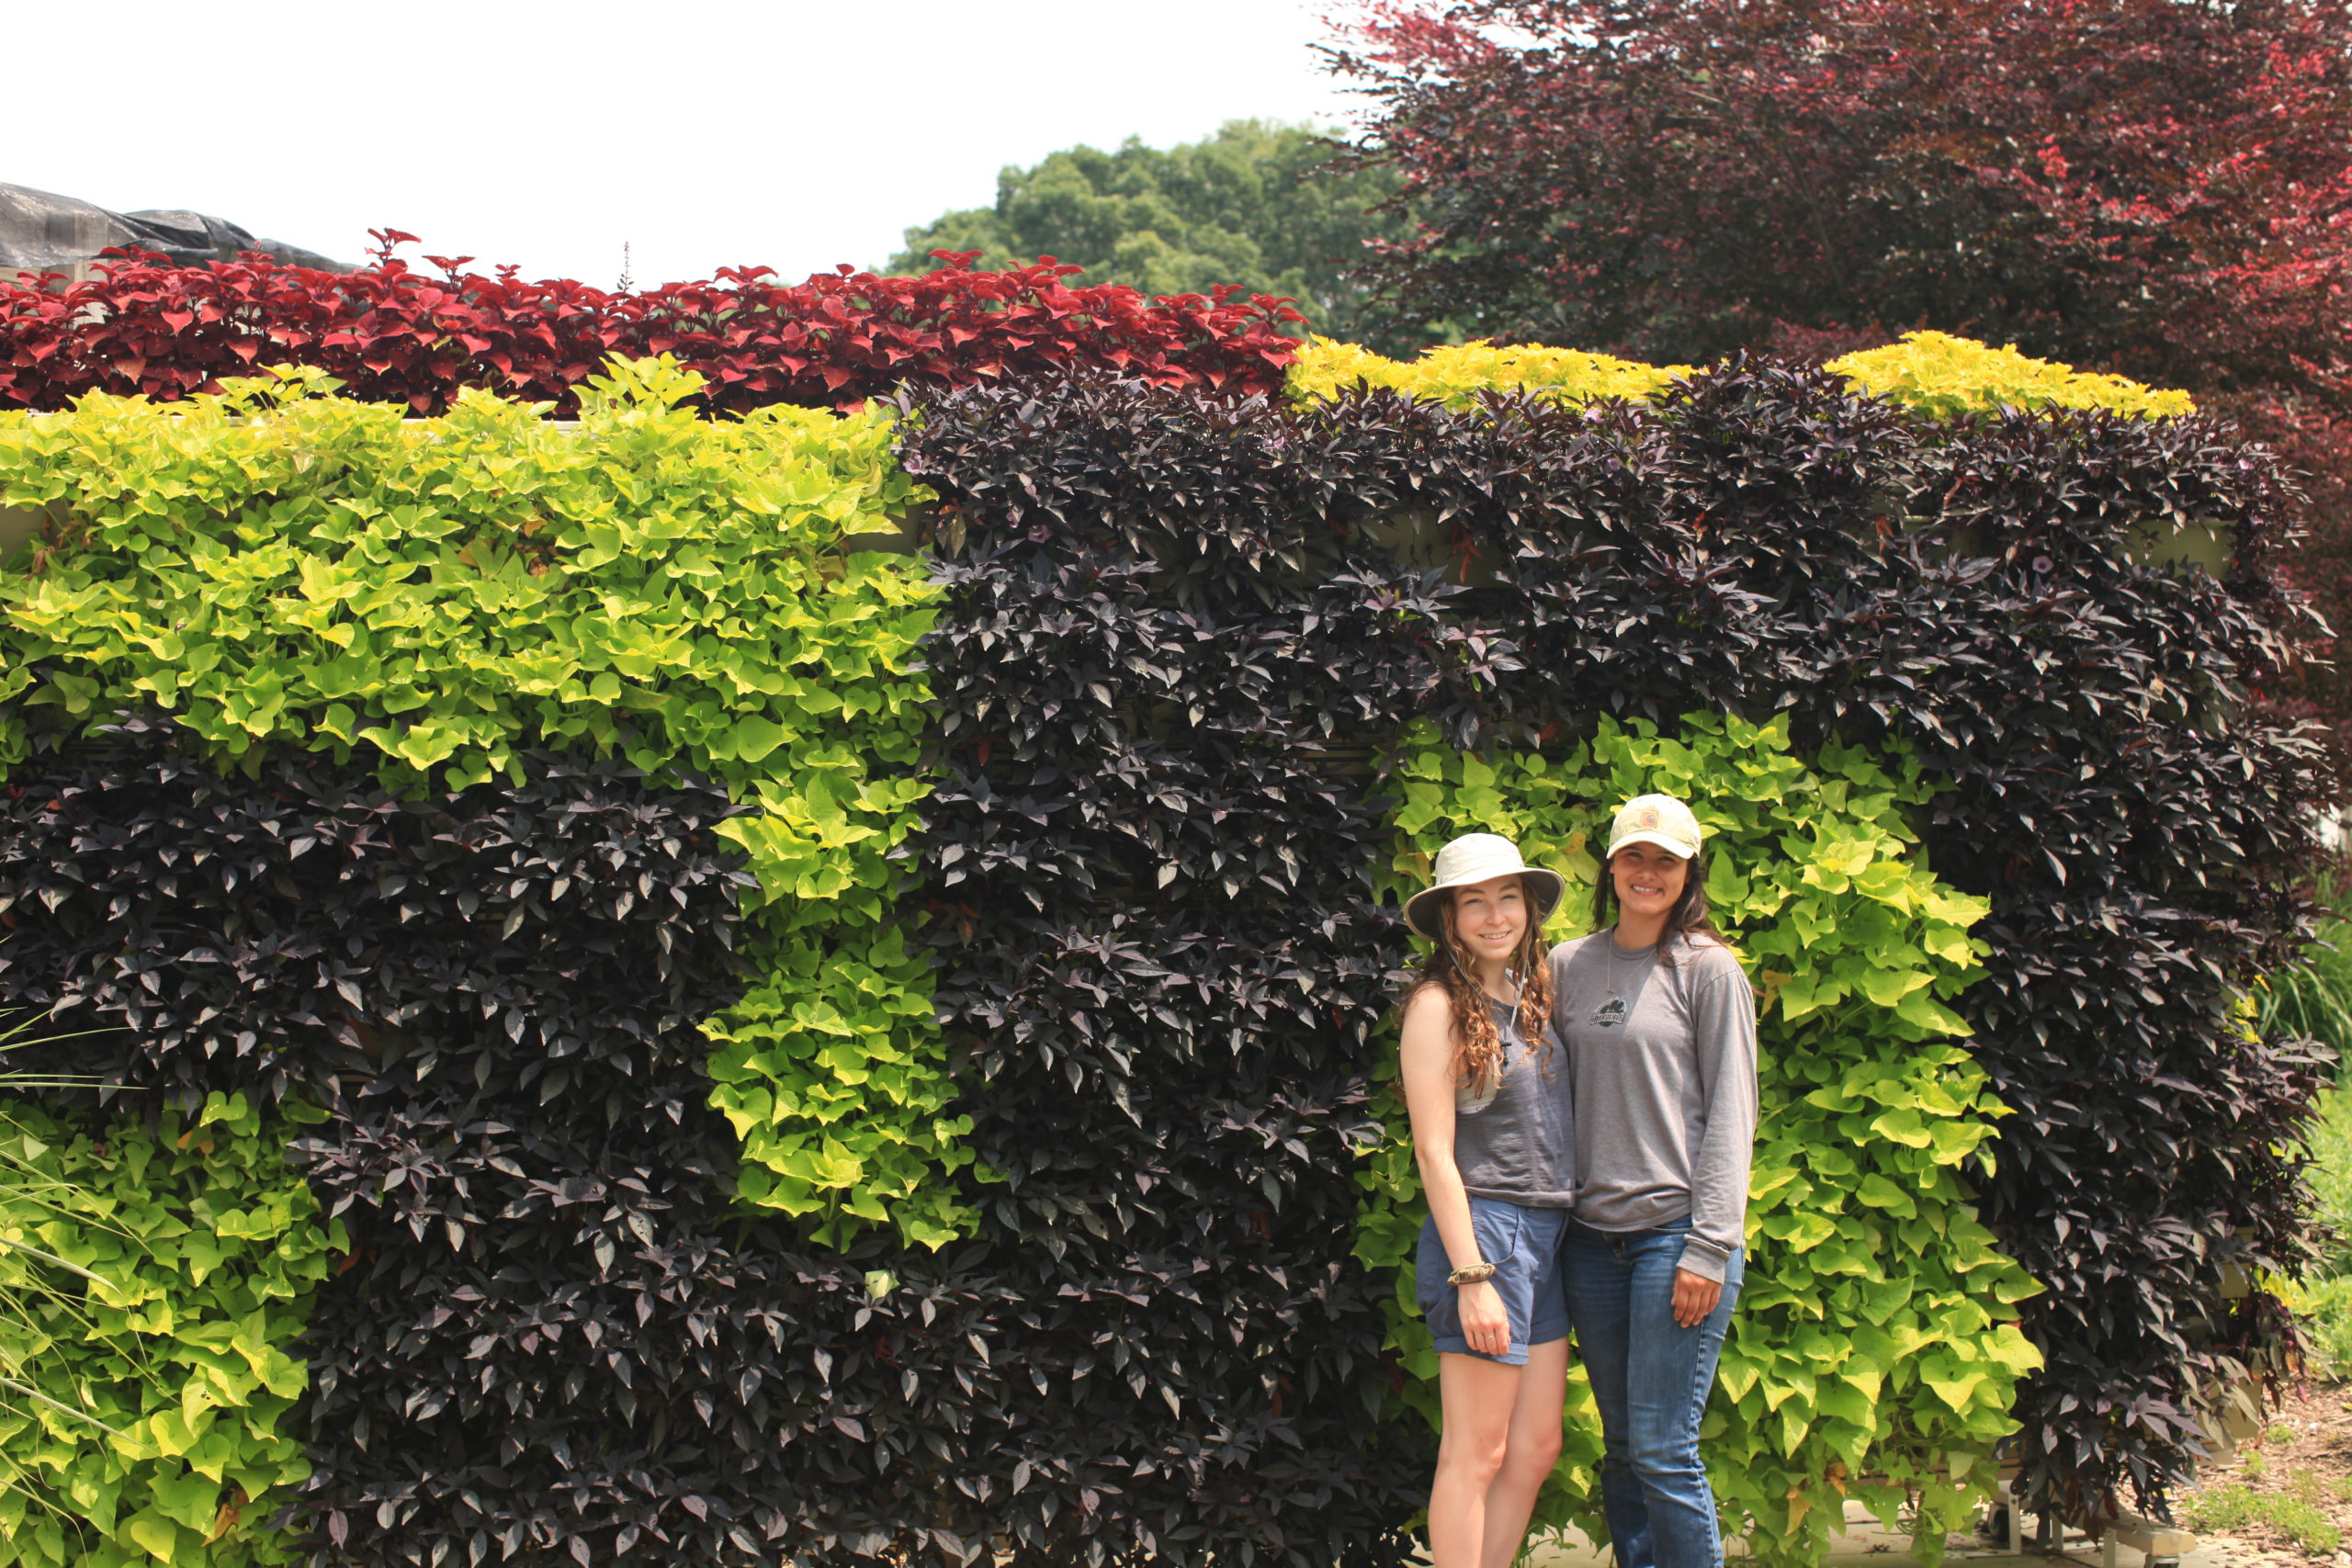 Two interns posing in front of a patterned living wall